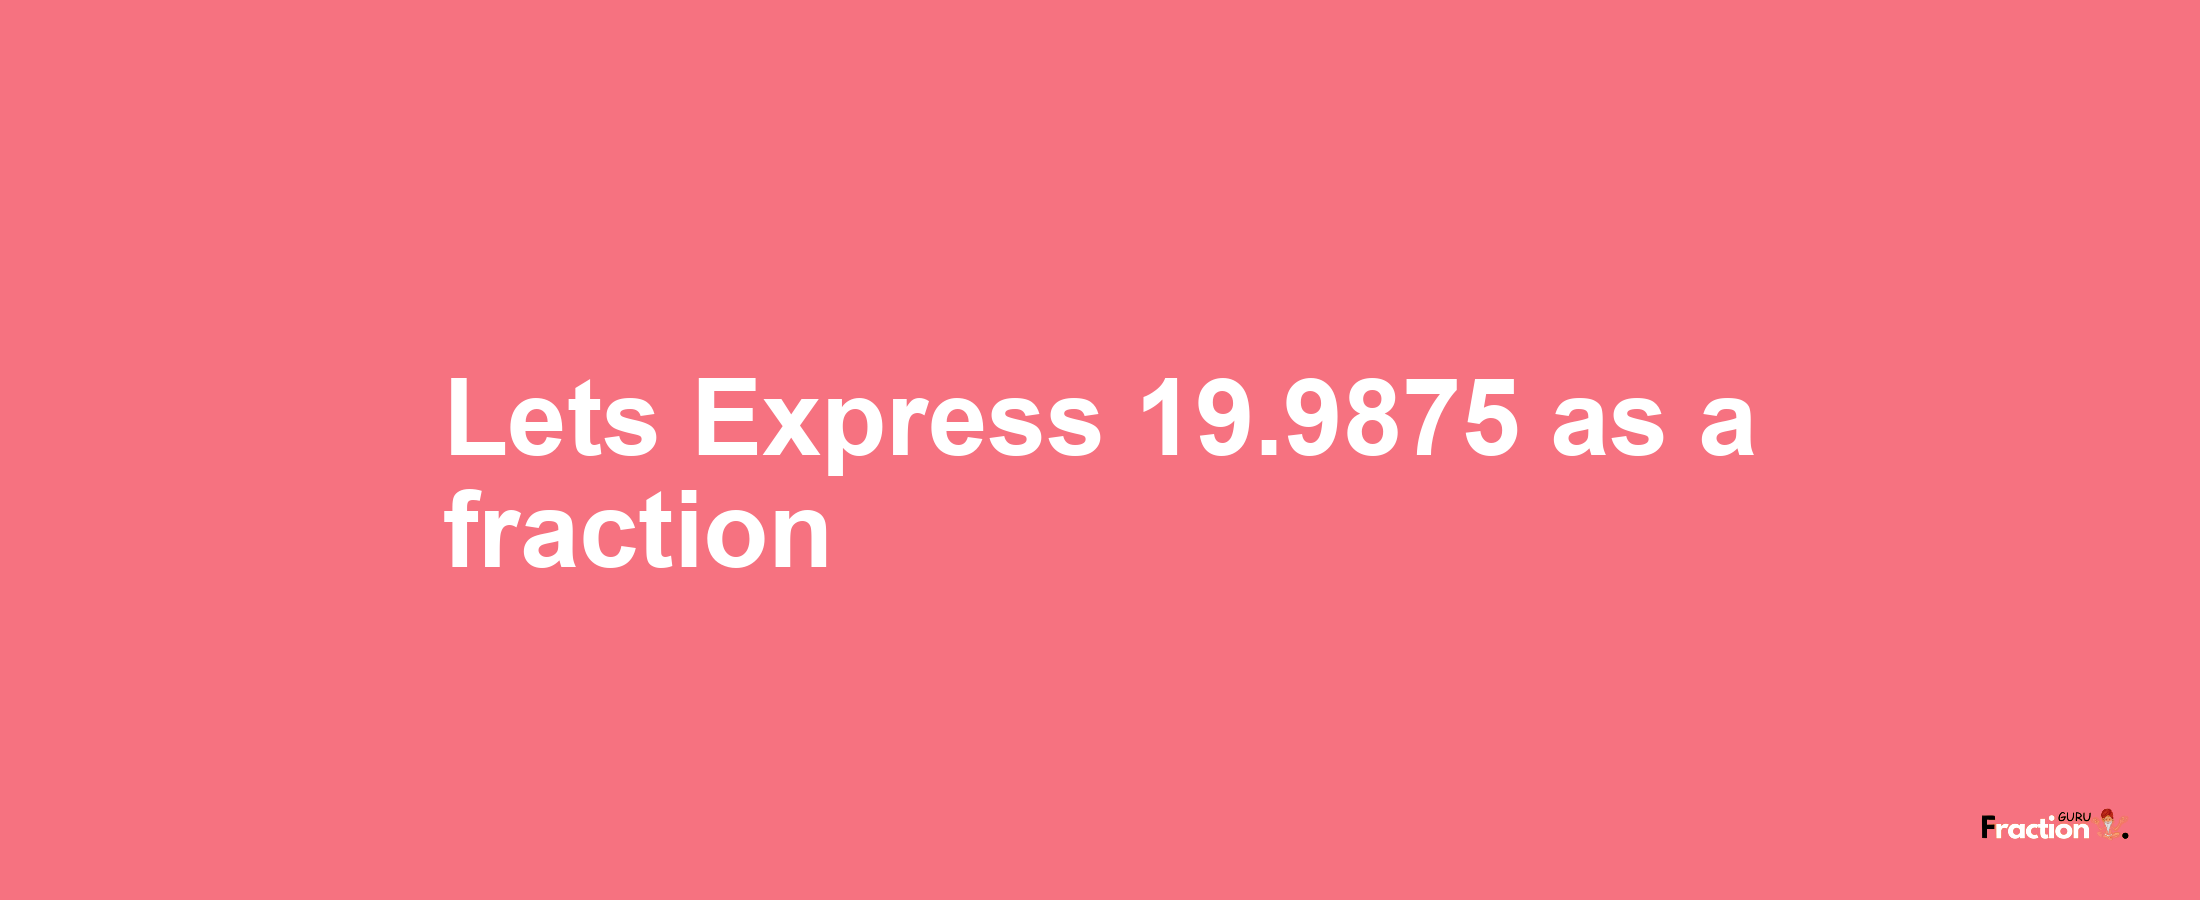 Lets Express 19.9875 as afraction